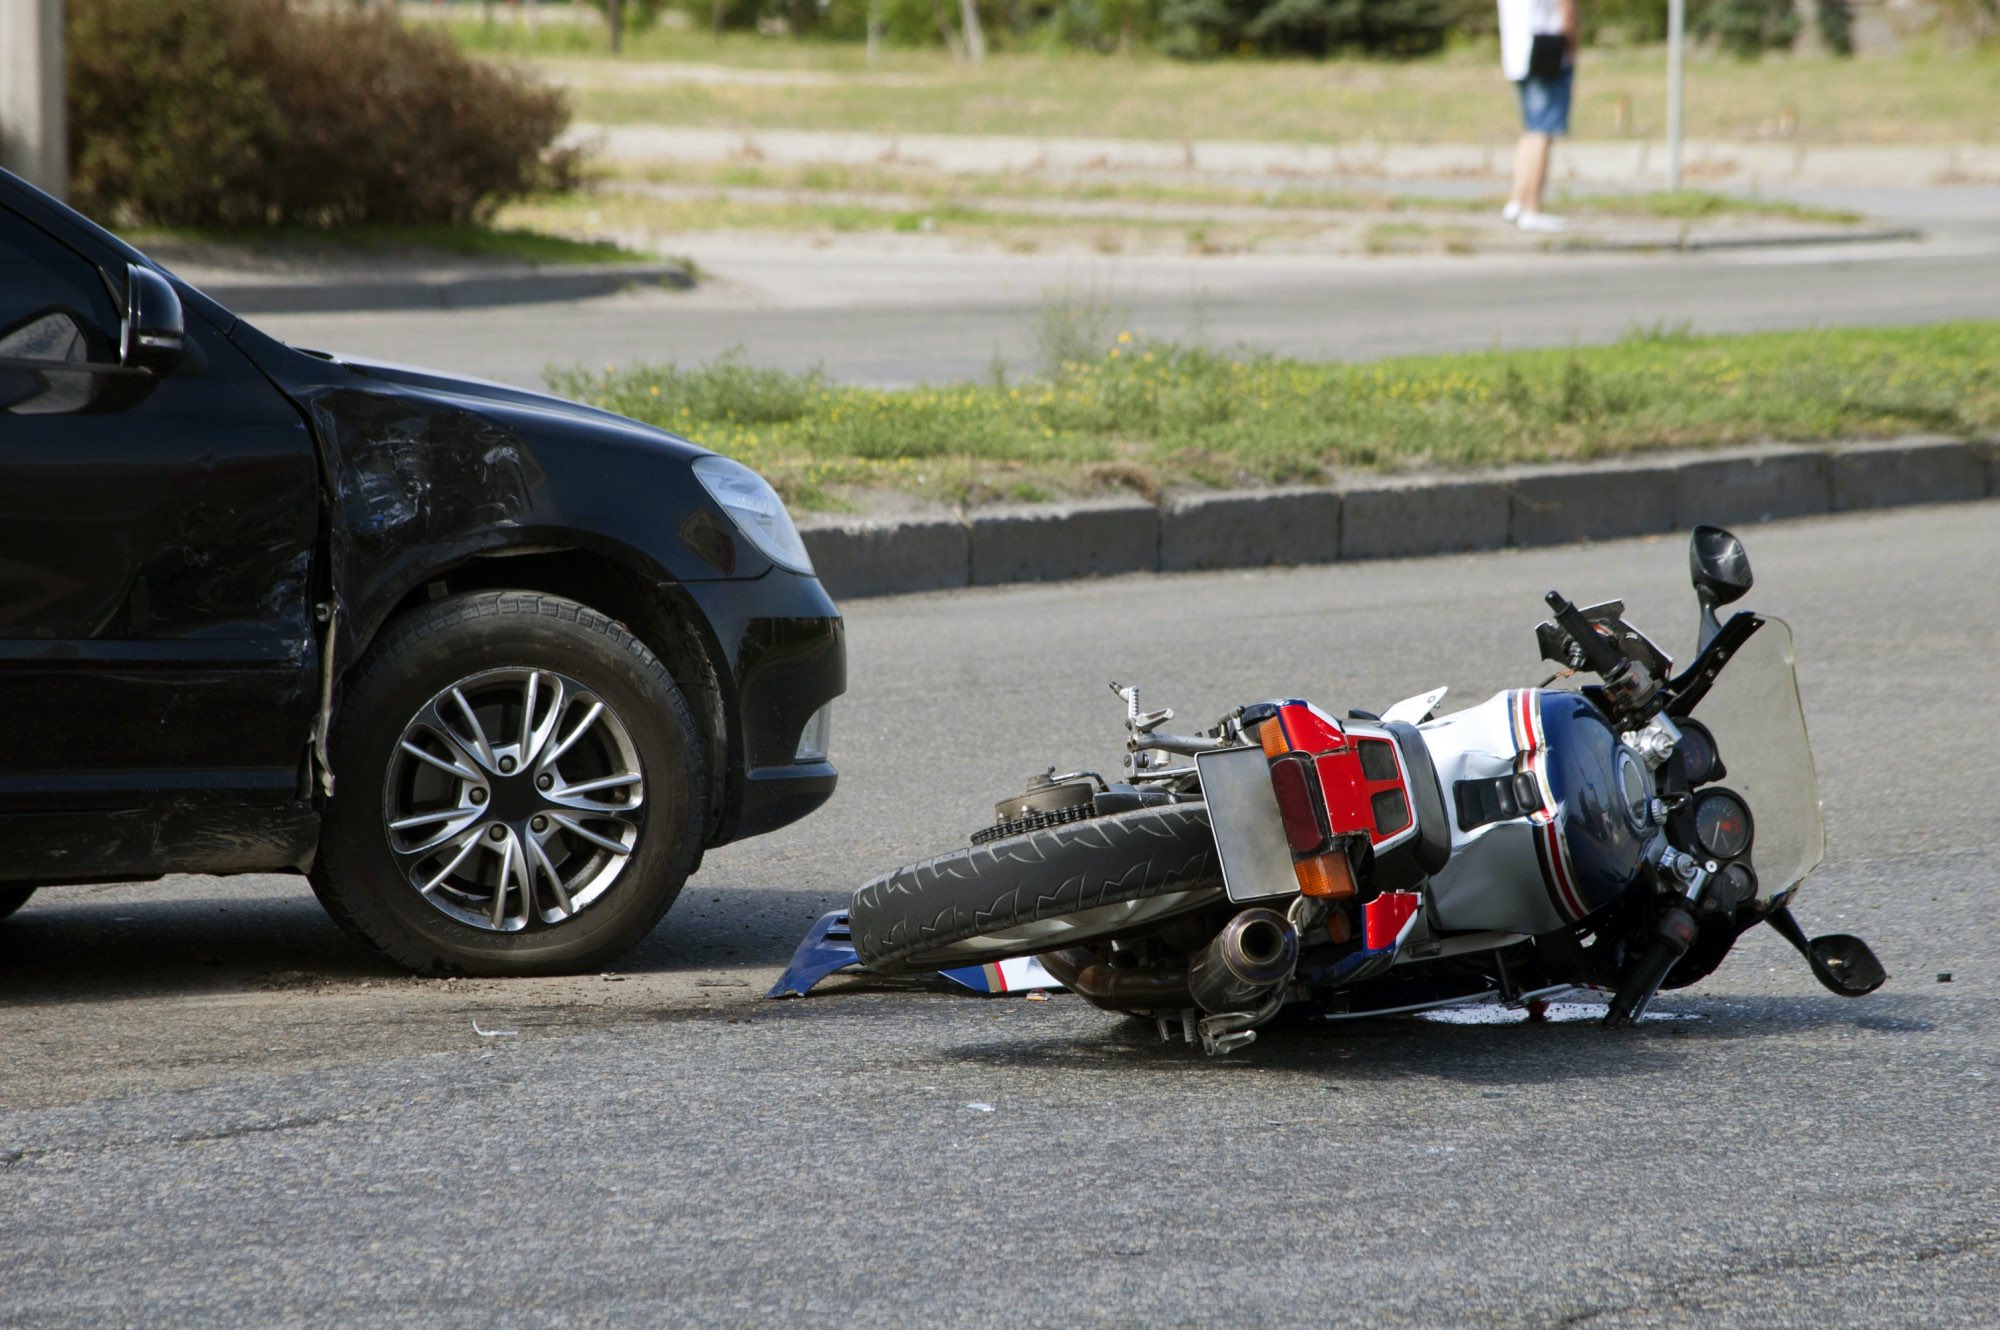 HowtoFileforMotorcycleAccidentClaims AStep By StepGuideforDeterminingRecoverableDamages